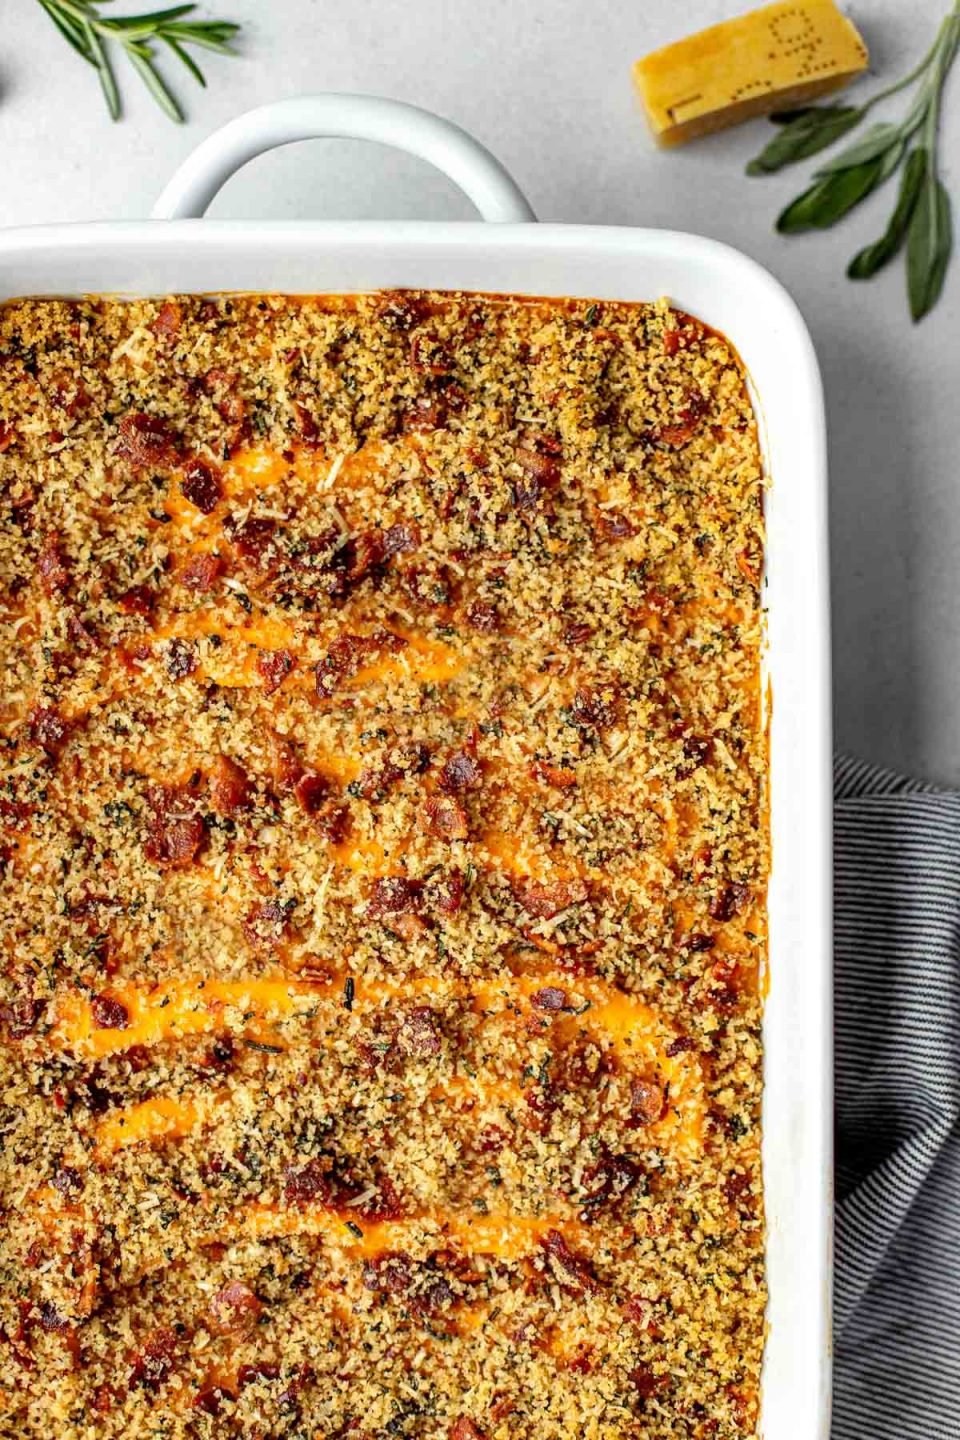 An overhead shot of a baking dish filled with assembled and baked Savory Sweet Potato Casserole topped with bacon breadcrumb topping. The baking dish sits atop a creamy white textured surface. A gray and white striped linen napkin is tucked underneath the baking dish. A few loose fresh herbs and a parmesan rind surround the baking dish.